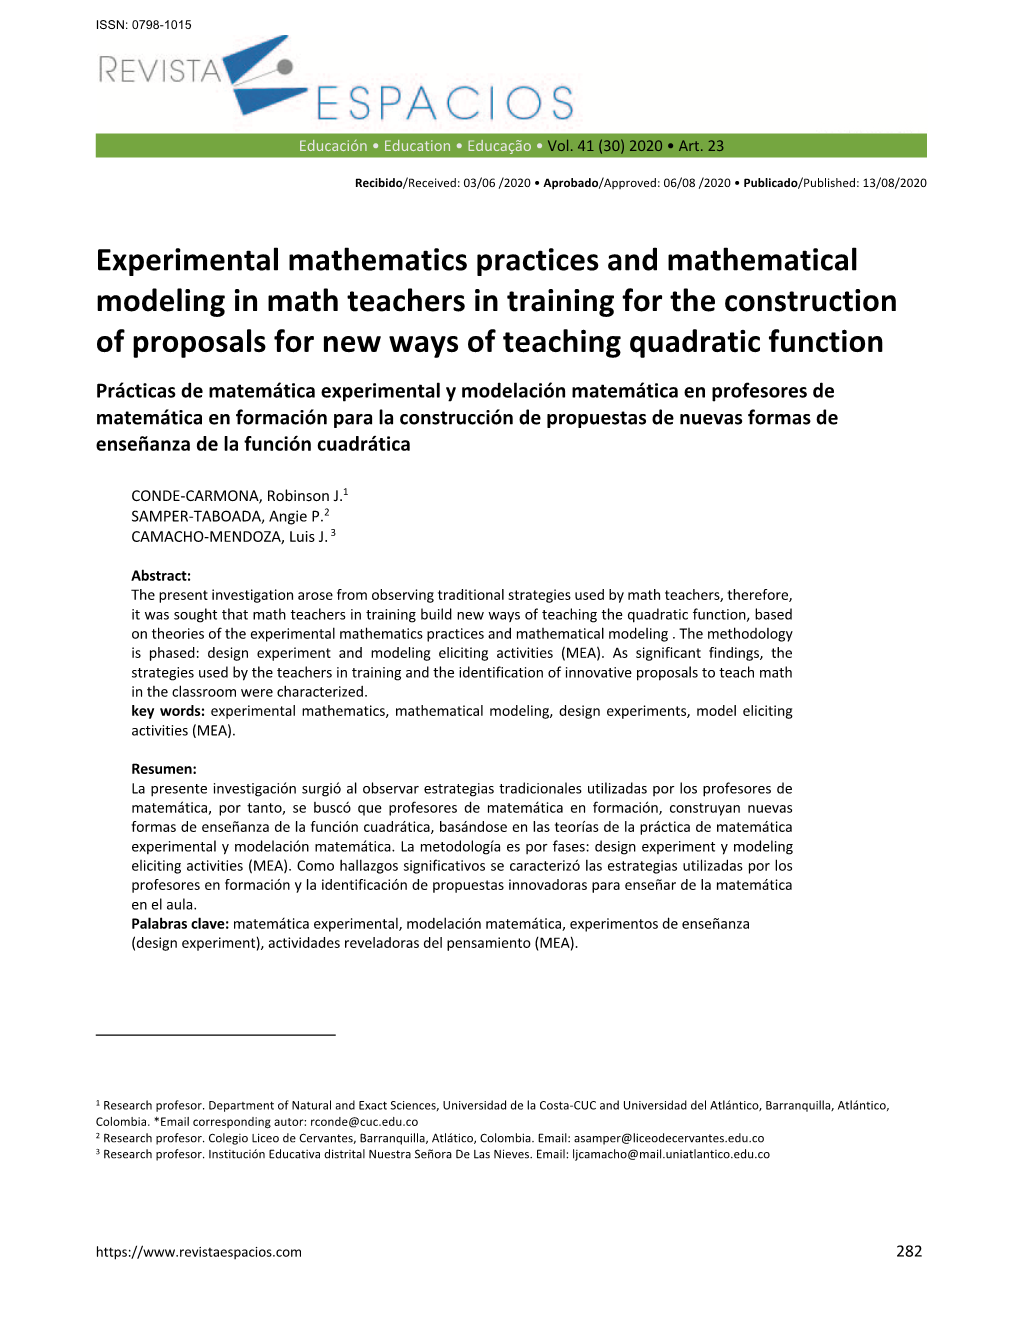 Experimental Mathematics Practices and Mathematical Modeling in Math